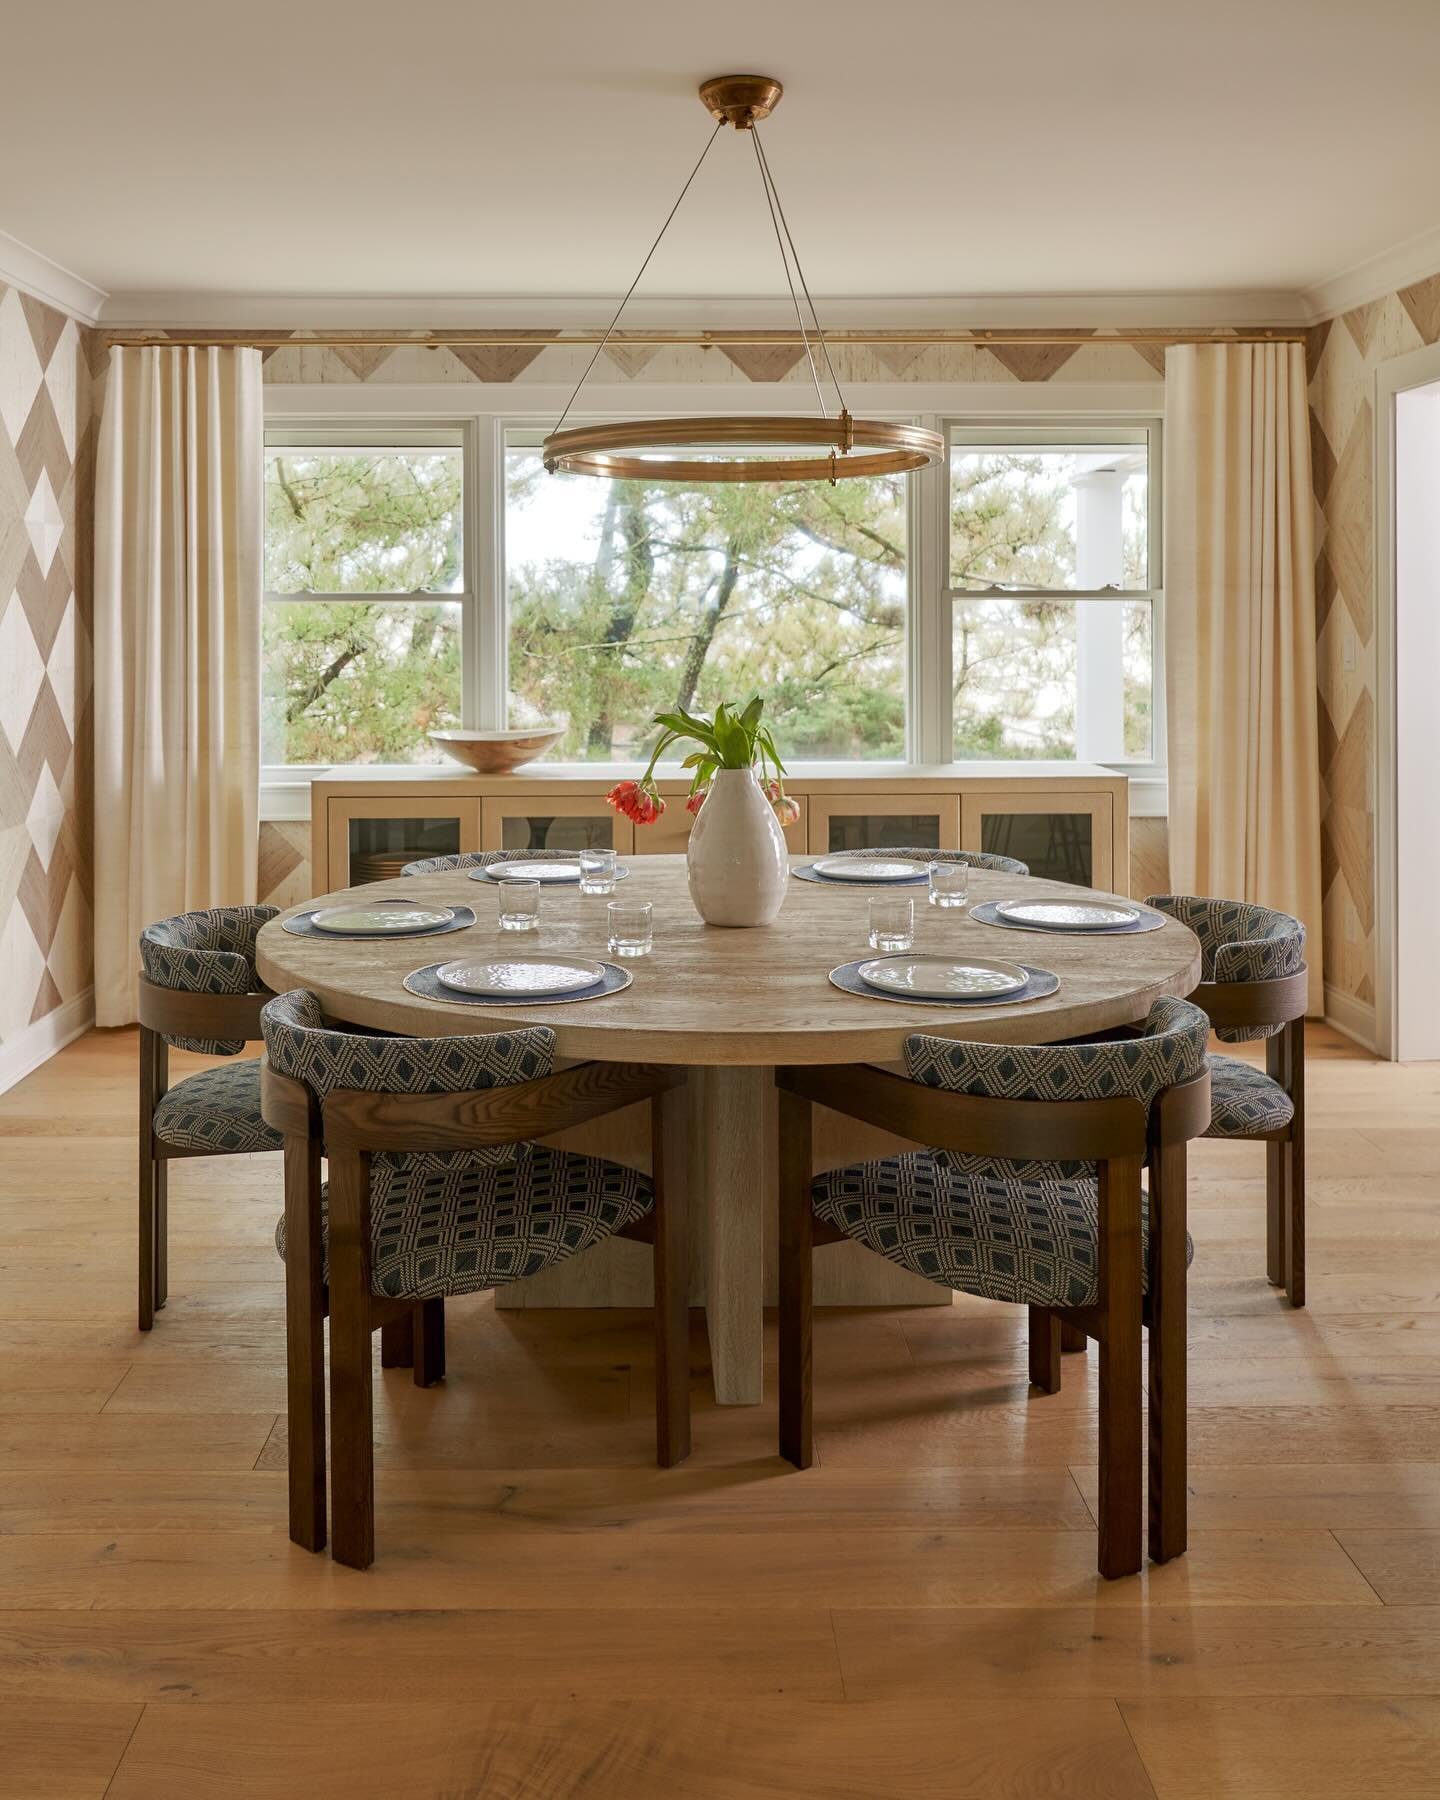 It&rsquo;s #friday and we&rsquo;re ready to start the weekend early. Our recently completed #beachhouse is calling! This chic dining room is the perfect spot to host family and friends. Swipe to see a behind the scenes process of the #transformation 